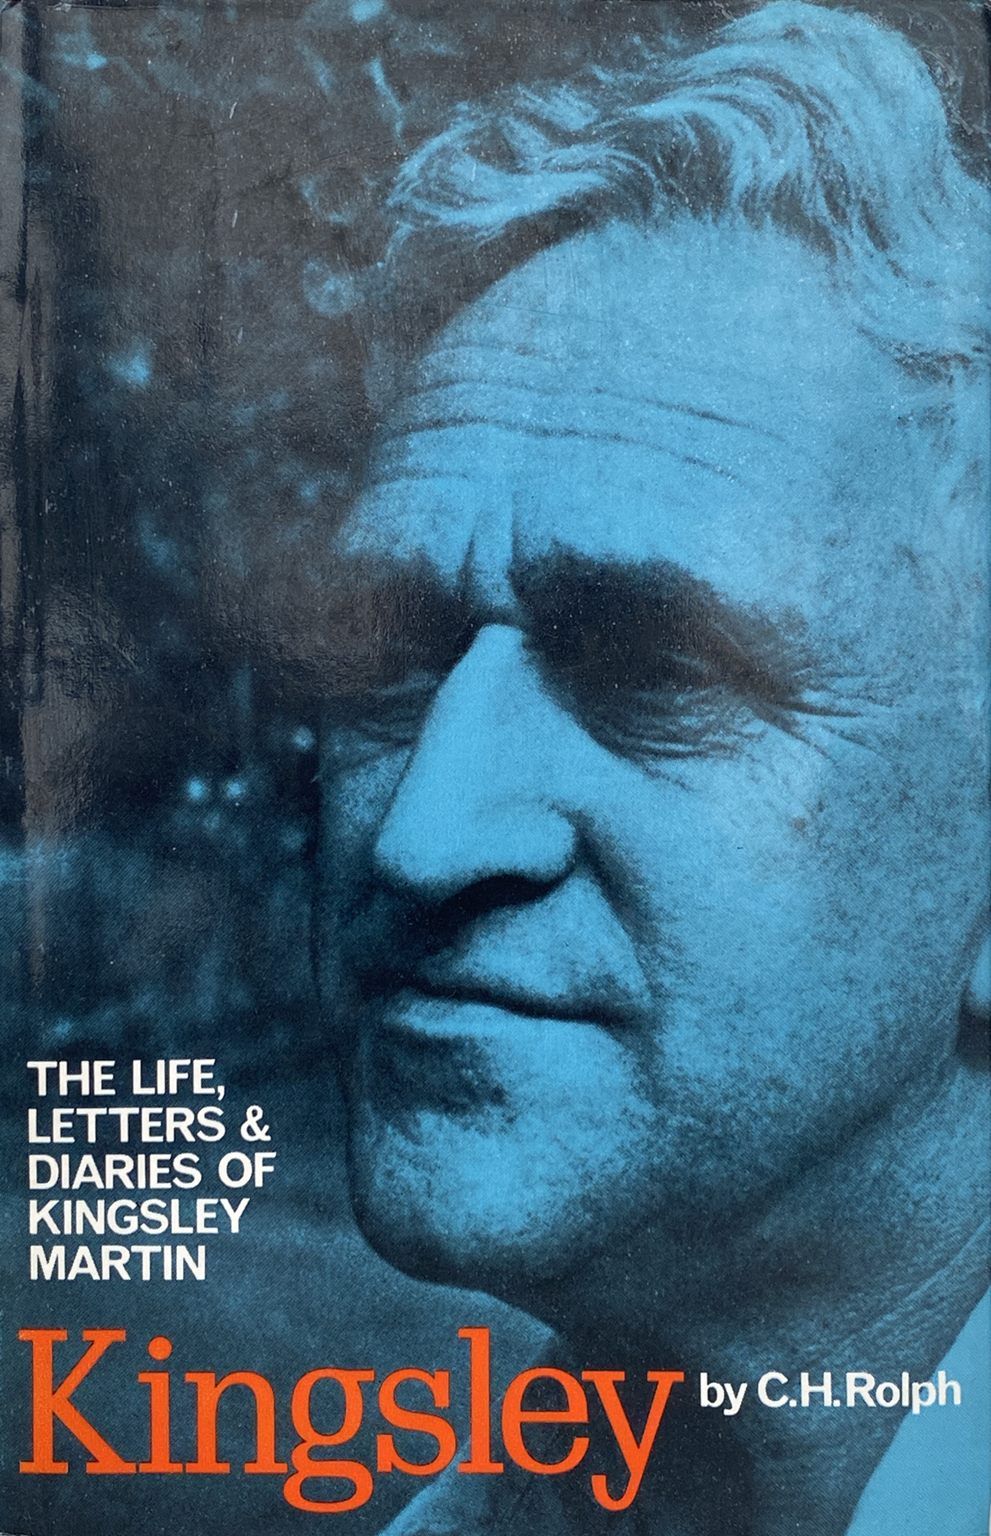 KINGSLEY: The Life, Letters and Diaries of Kingsley Martin